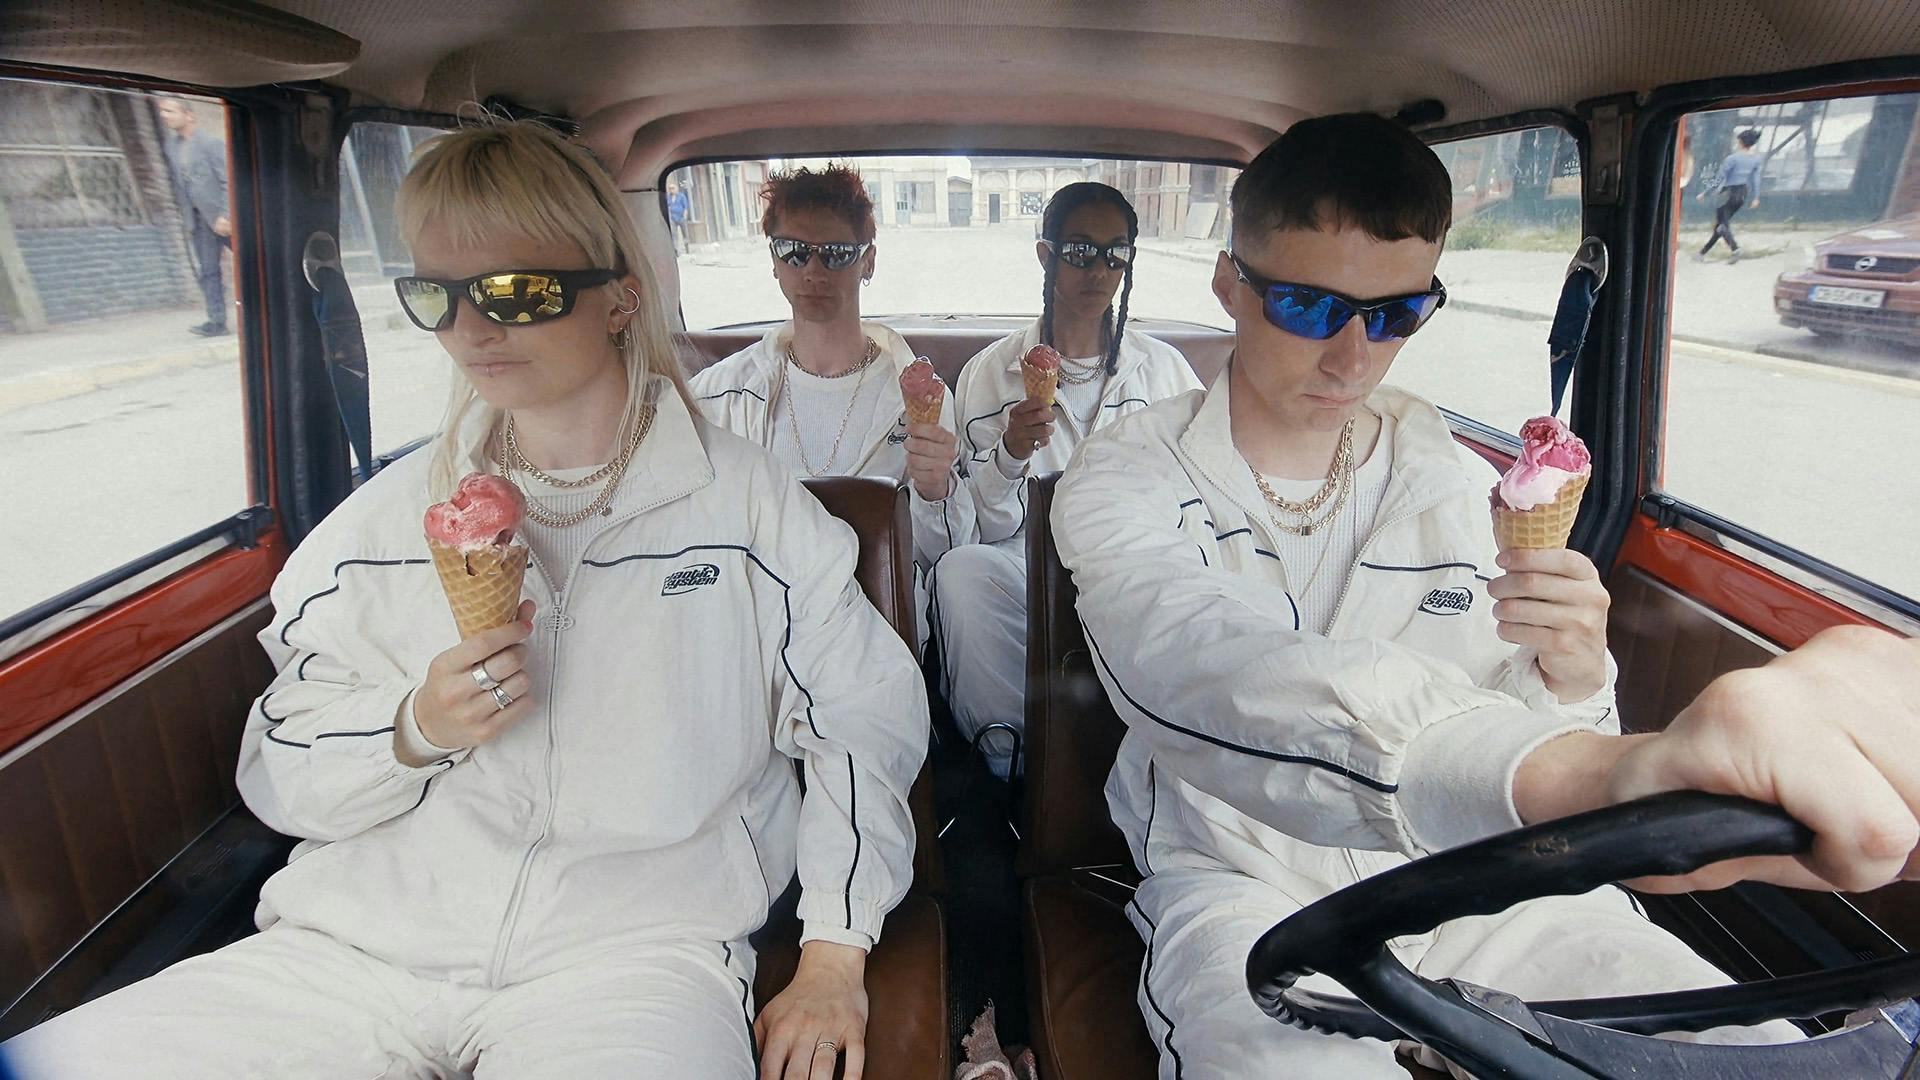 Still from Oscar Hudson's music video for Big Hammer by James Blake showing four young people in white matching tracksuits and visor sunglasses in a car, each holding an ice cream